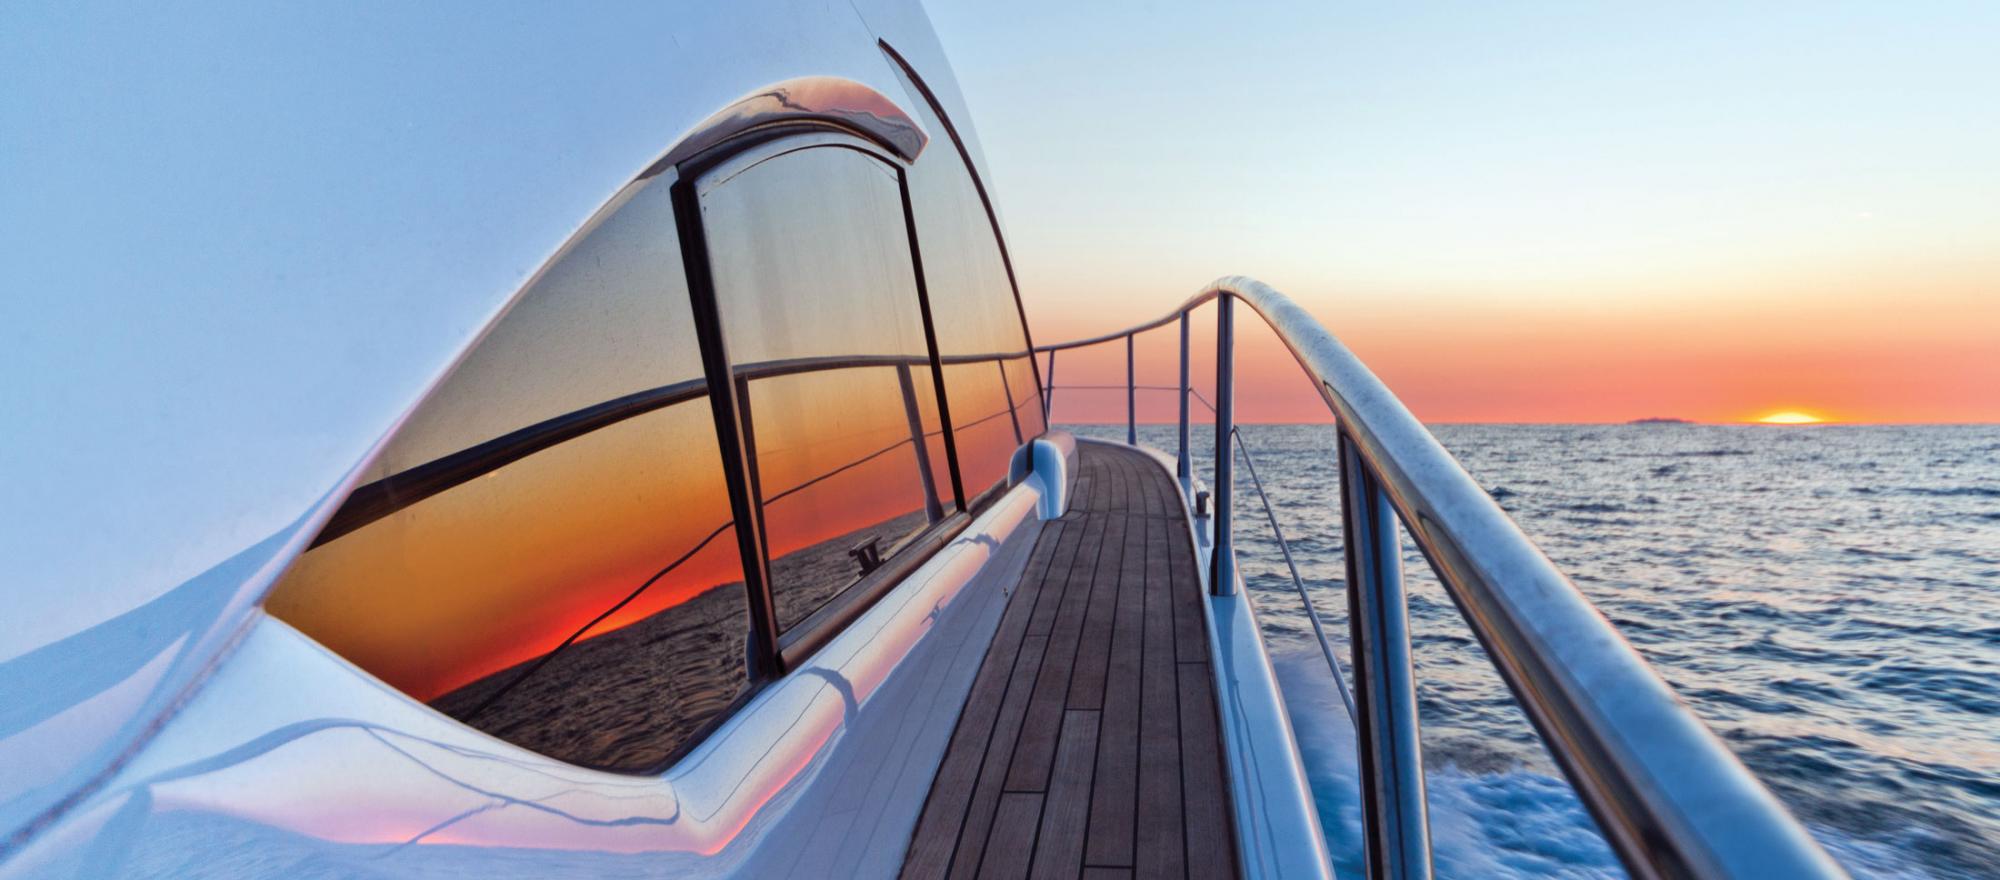 Sunset view from the deck of a yacht.